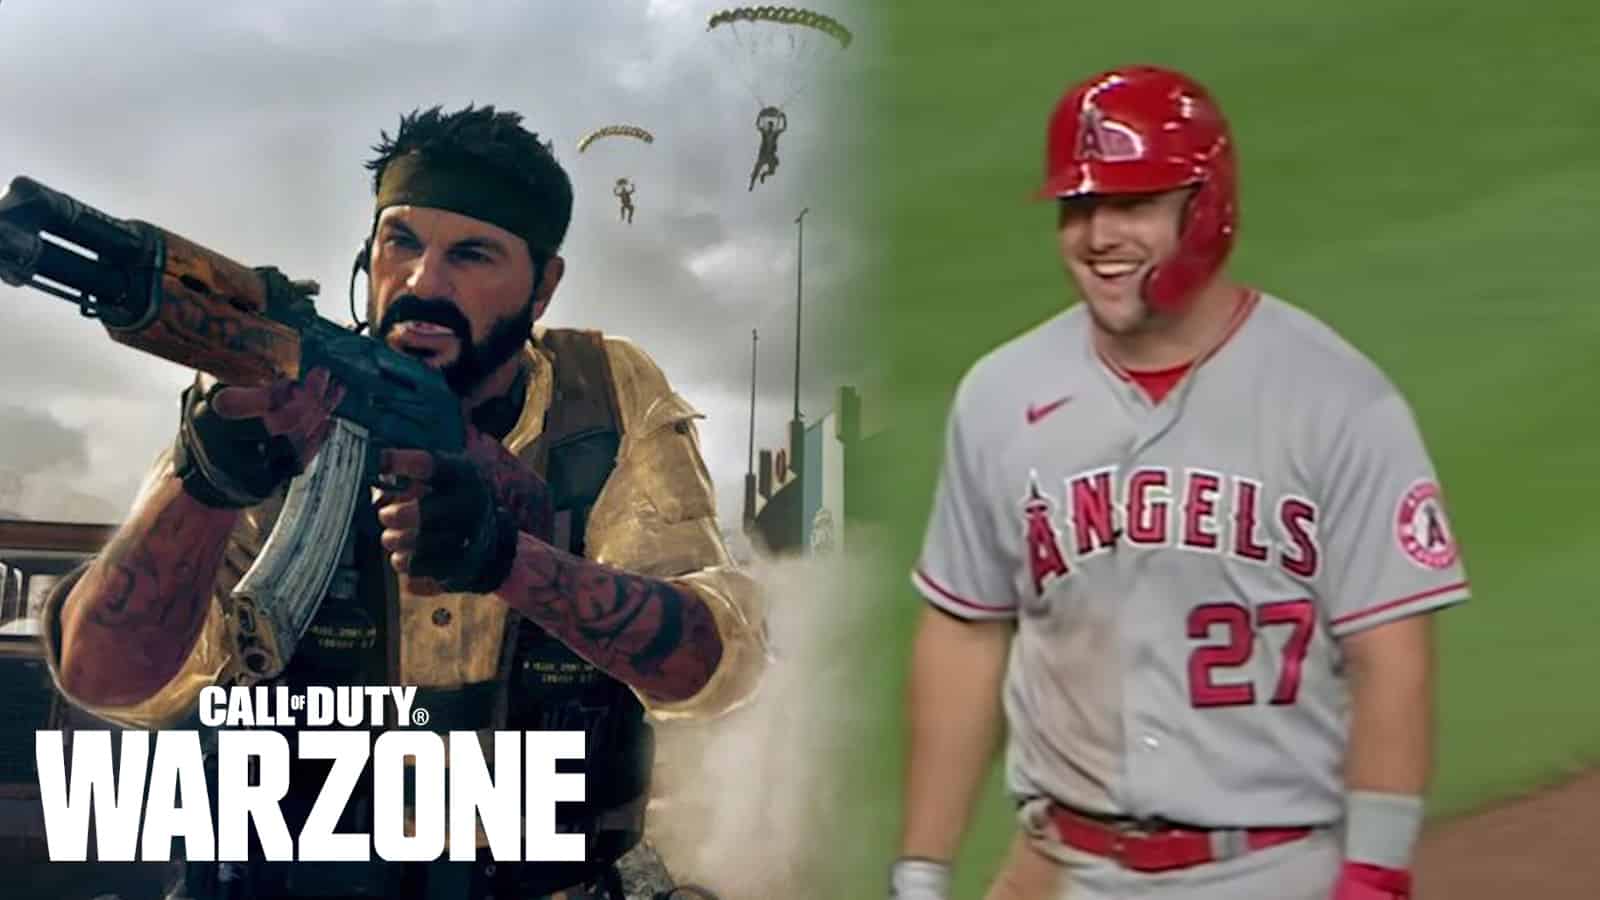 mike trout mac 10 mp5 warzone